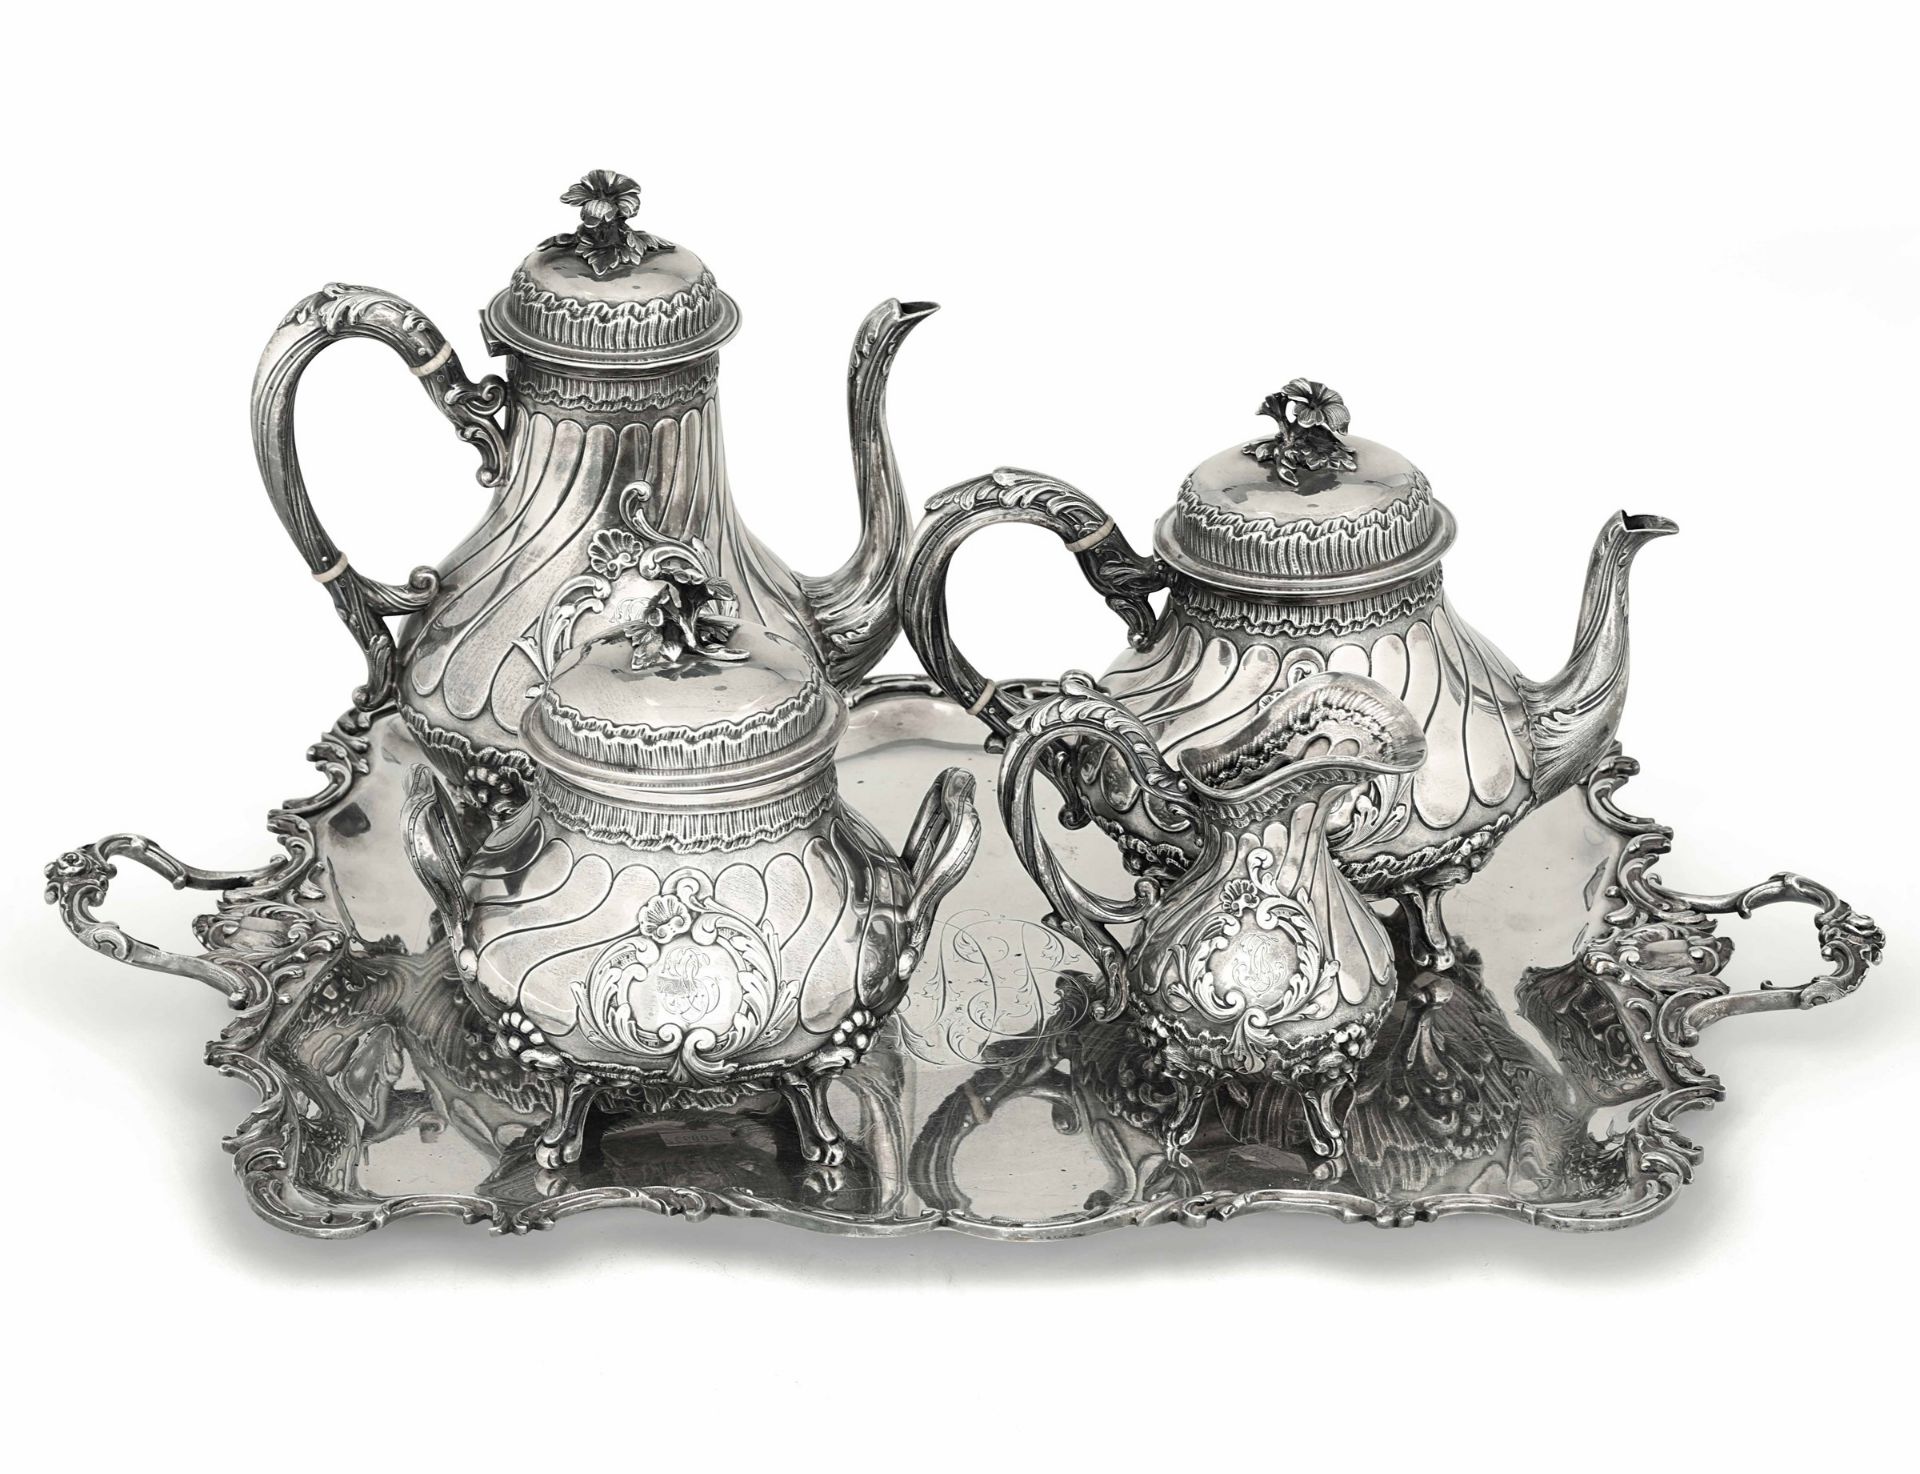 A silver set, Veyrat, France 1800s - Molten, embossed and chiselled silver. 3730gr, [...]